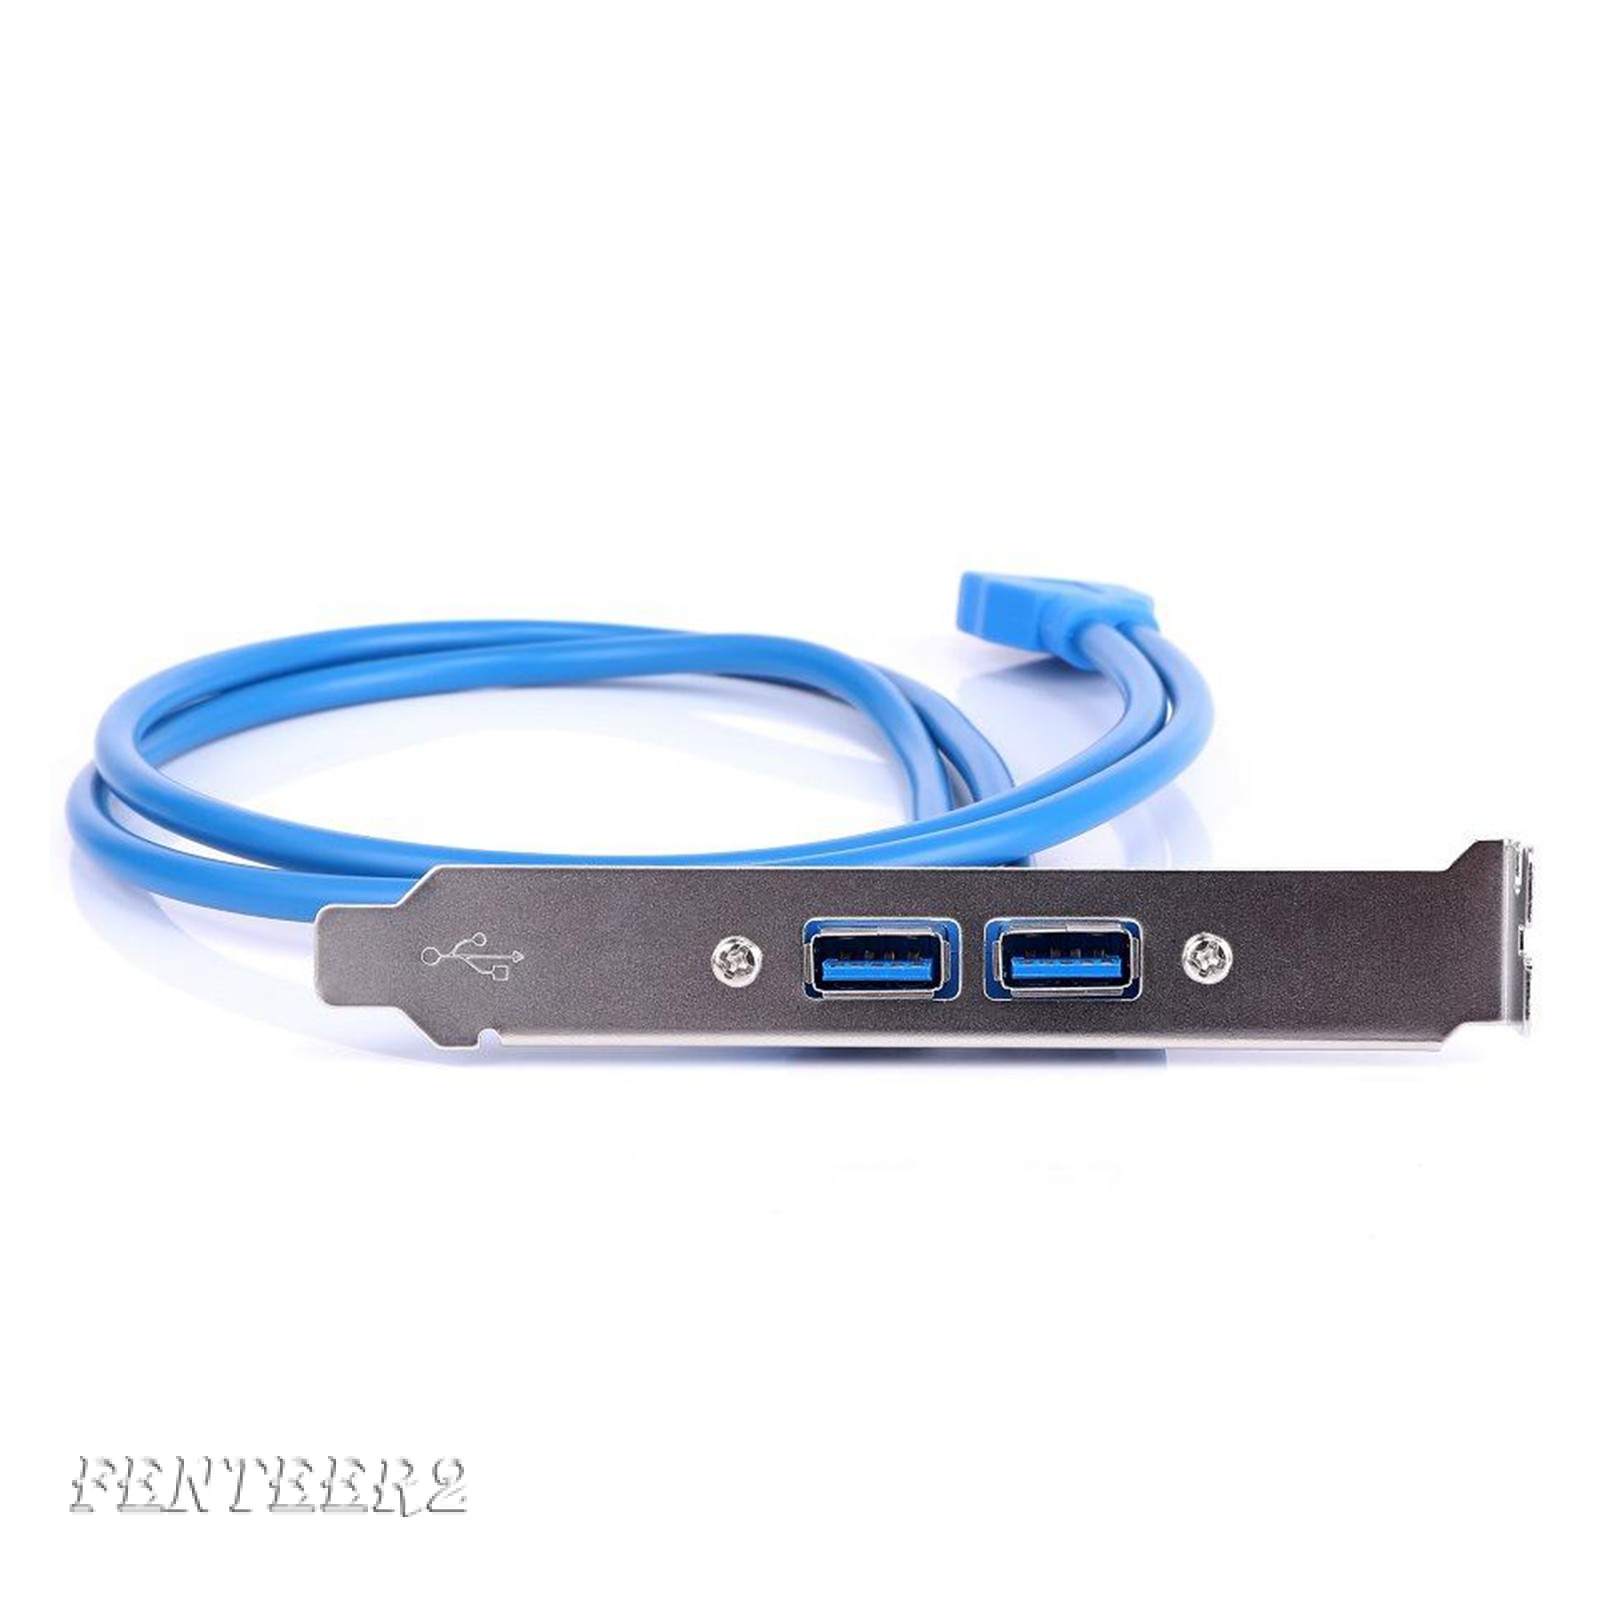 (Fenteer2 3c) Dual 2 Ports Usb 3.0 Back Panel To 20pin Header Cable With Bracket | WebRaoVat - webraovat.net.vn